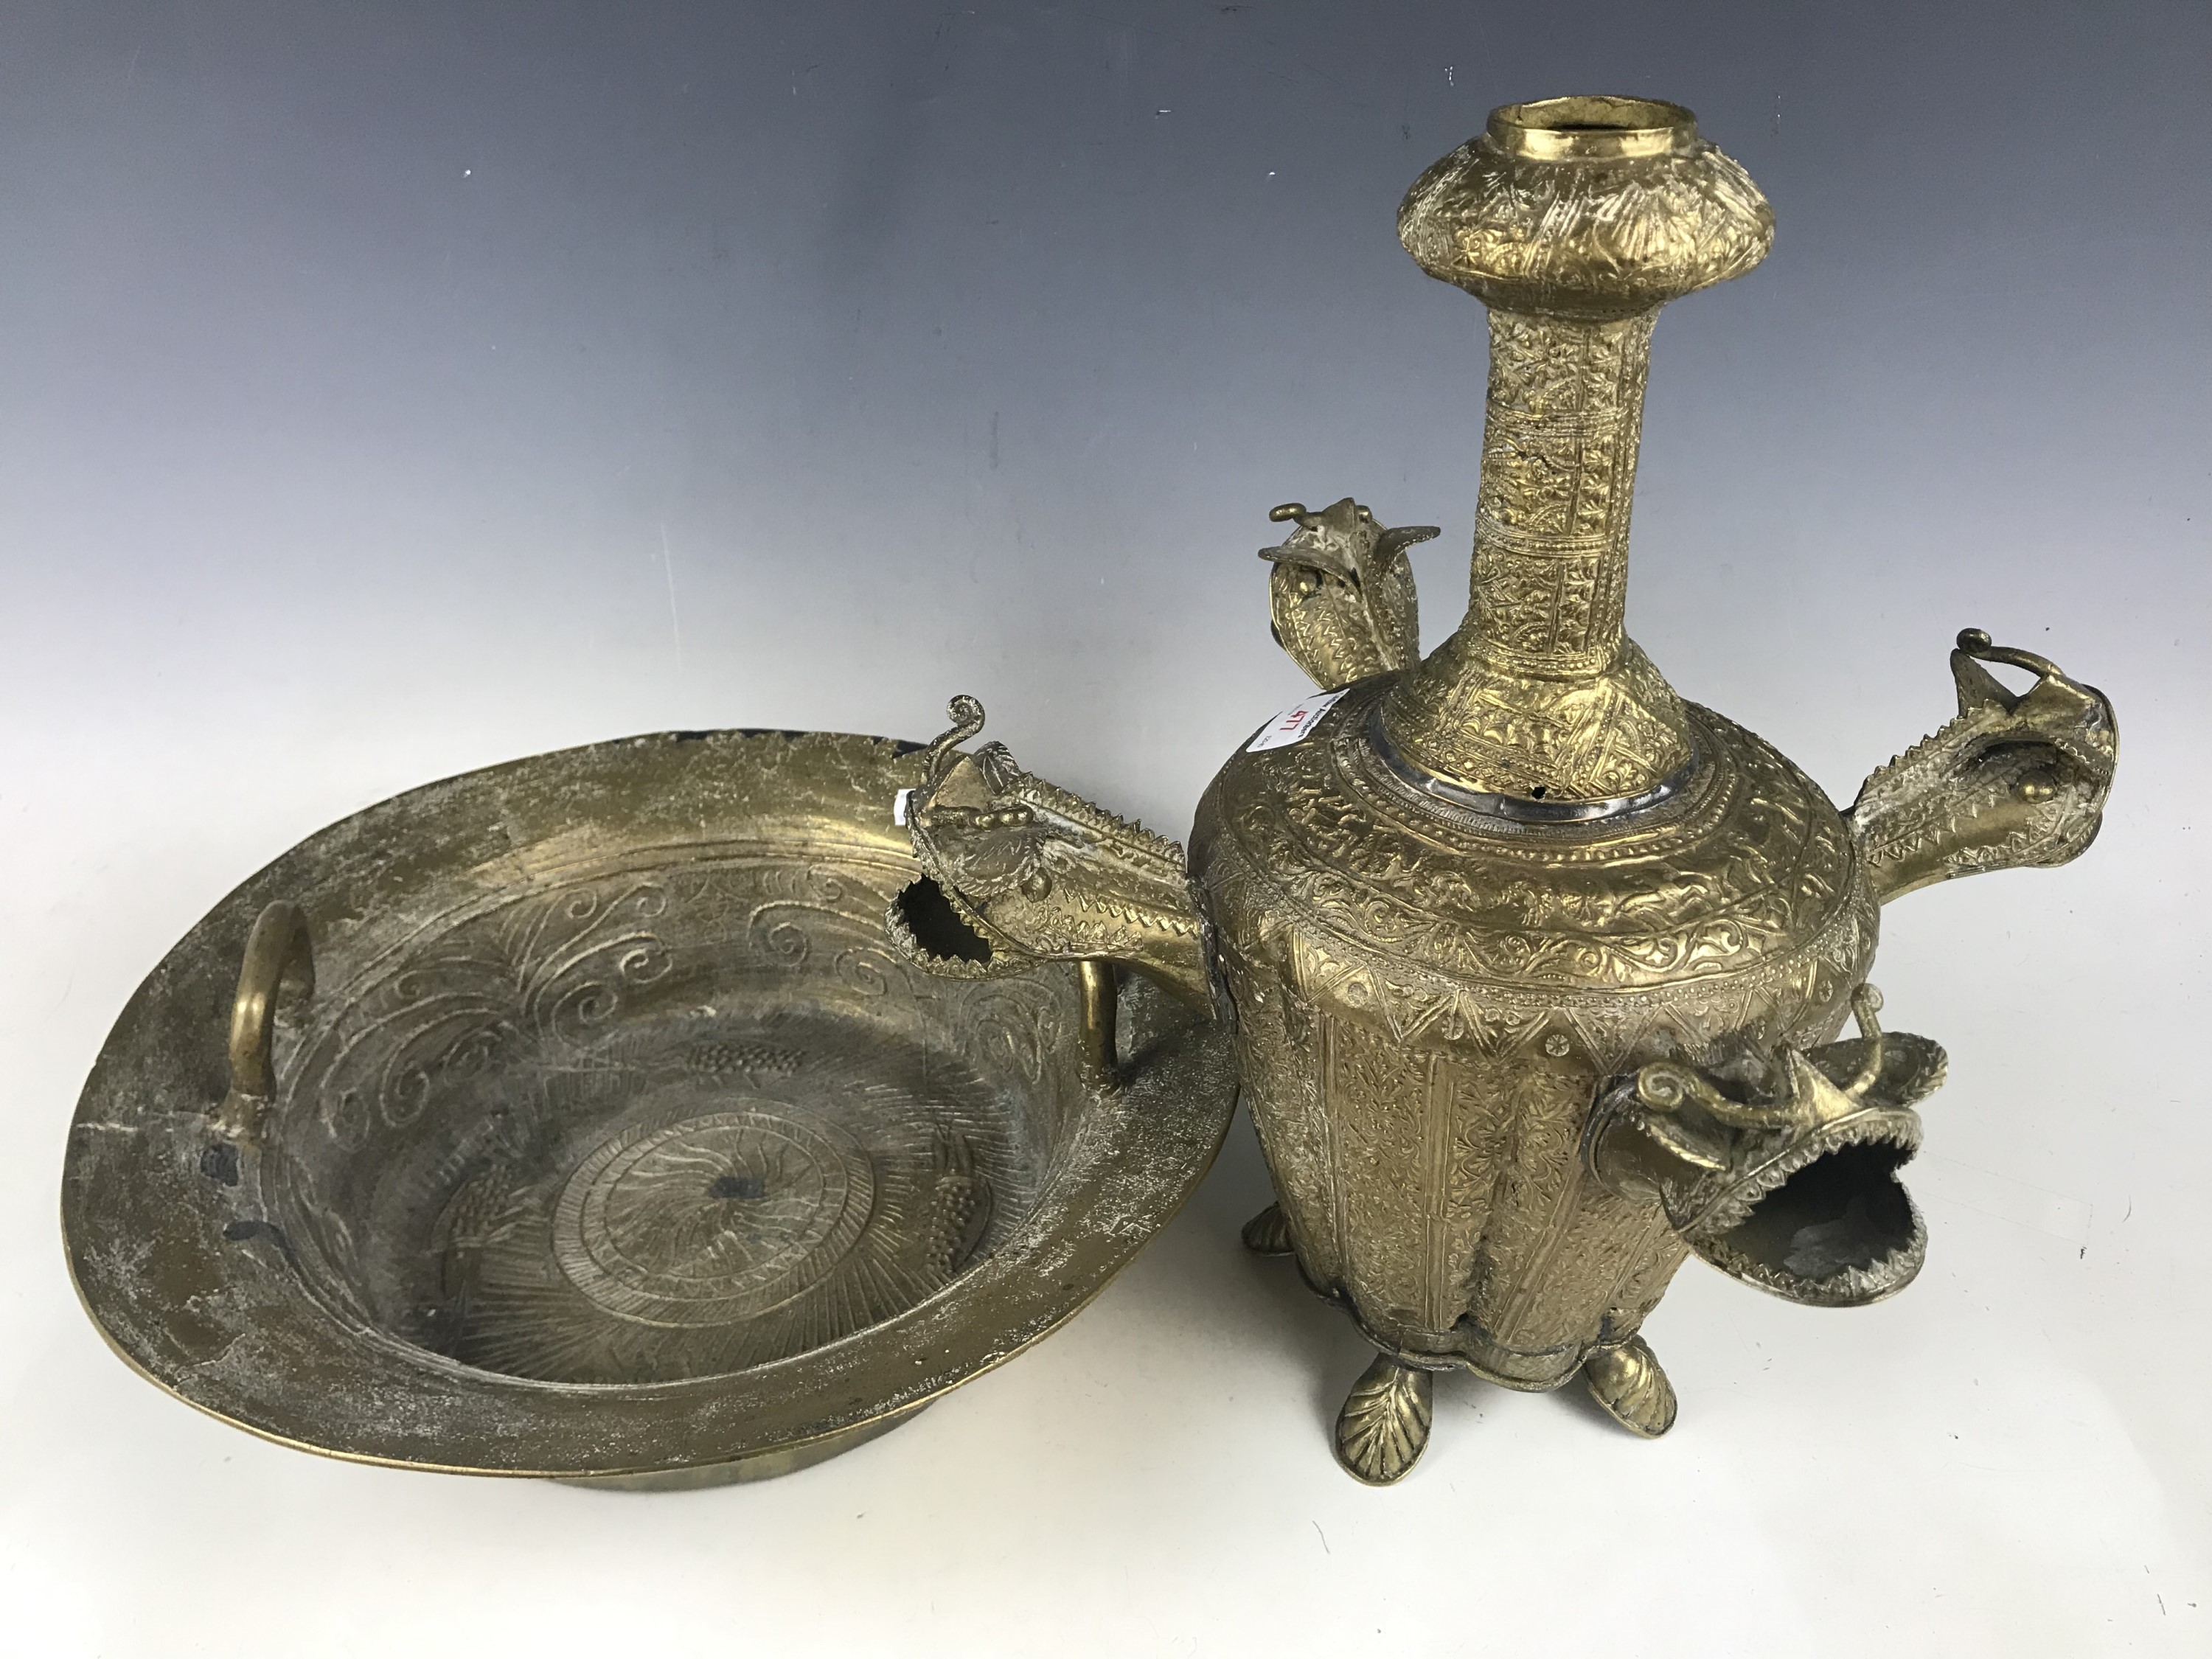 Two items of oriental / Middle Eastern brass including a multi-spouted lamp / vessel